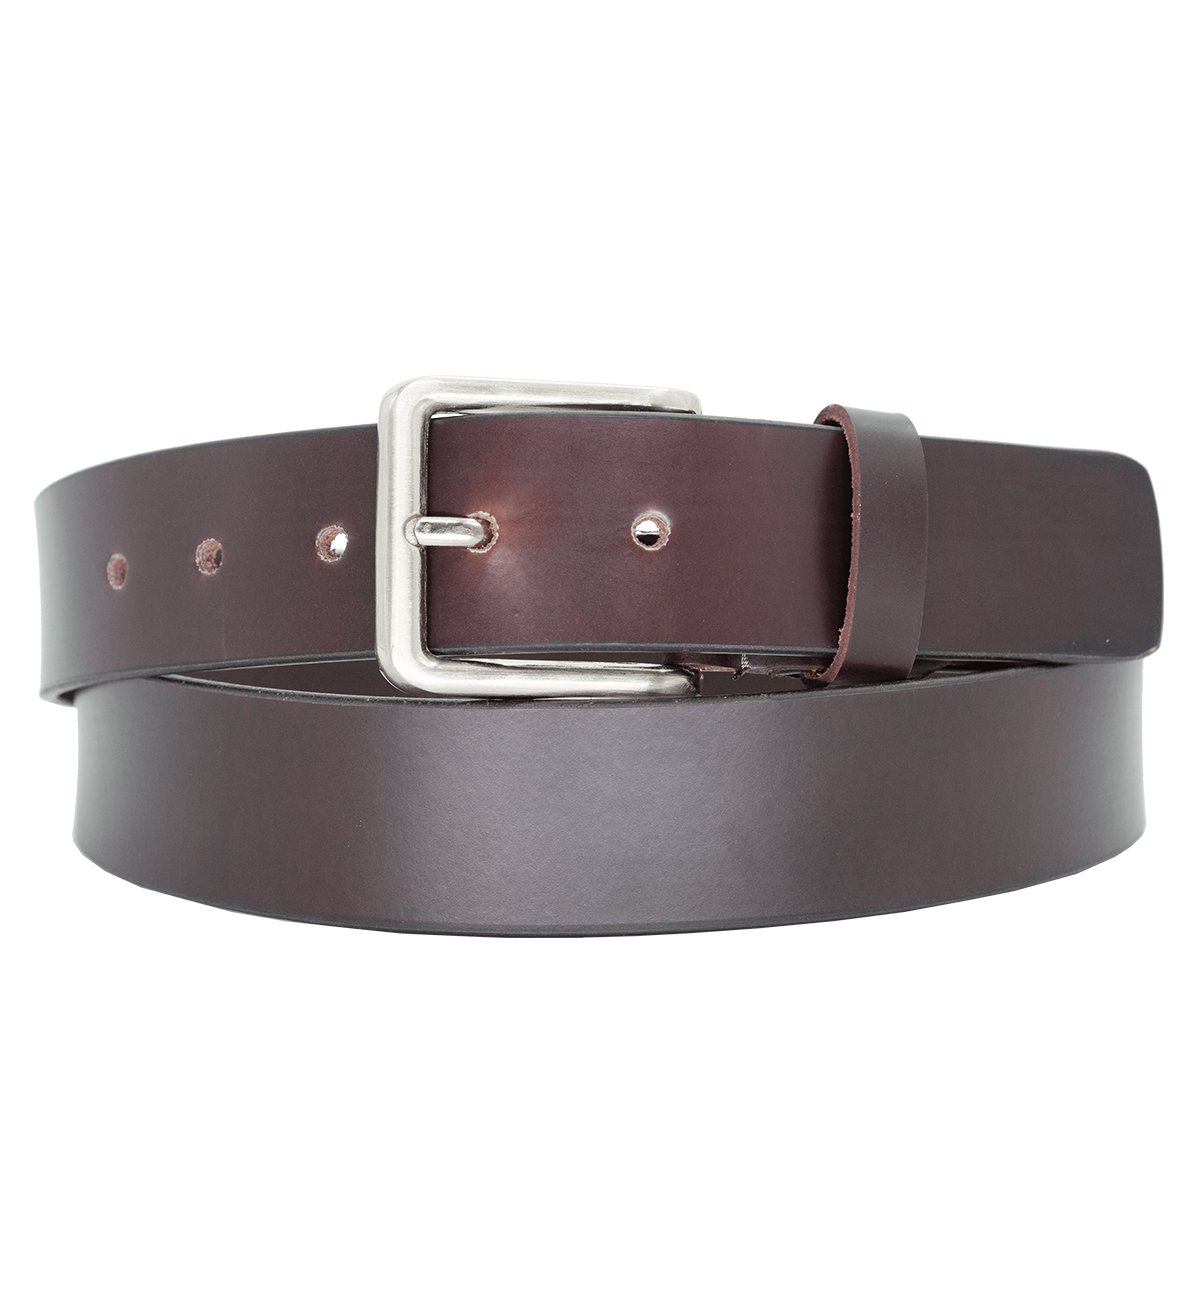 Men's Formal Leather Belt with Heavy Silver Buckle - #BT-1518